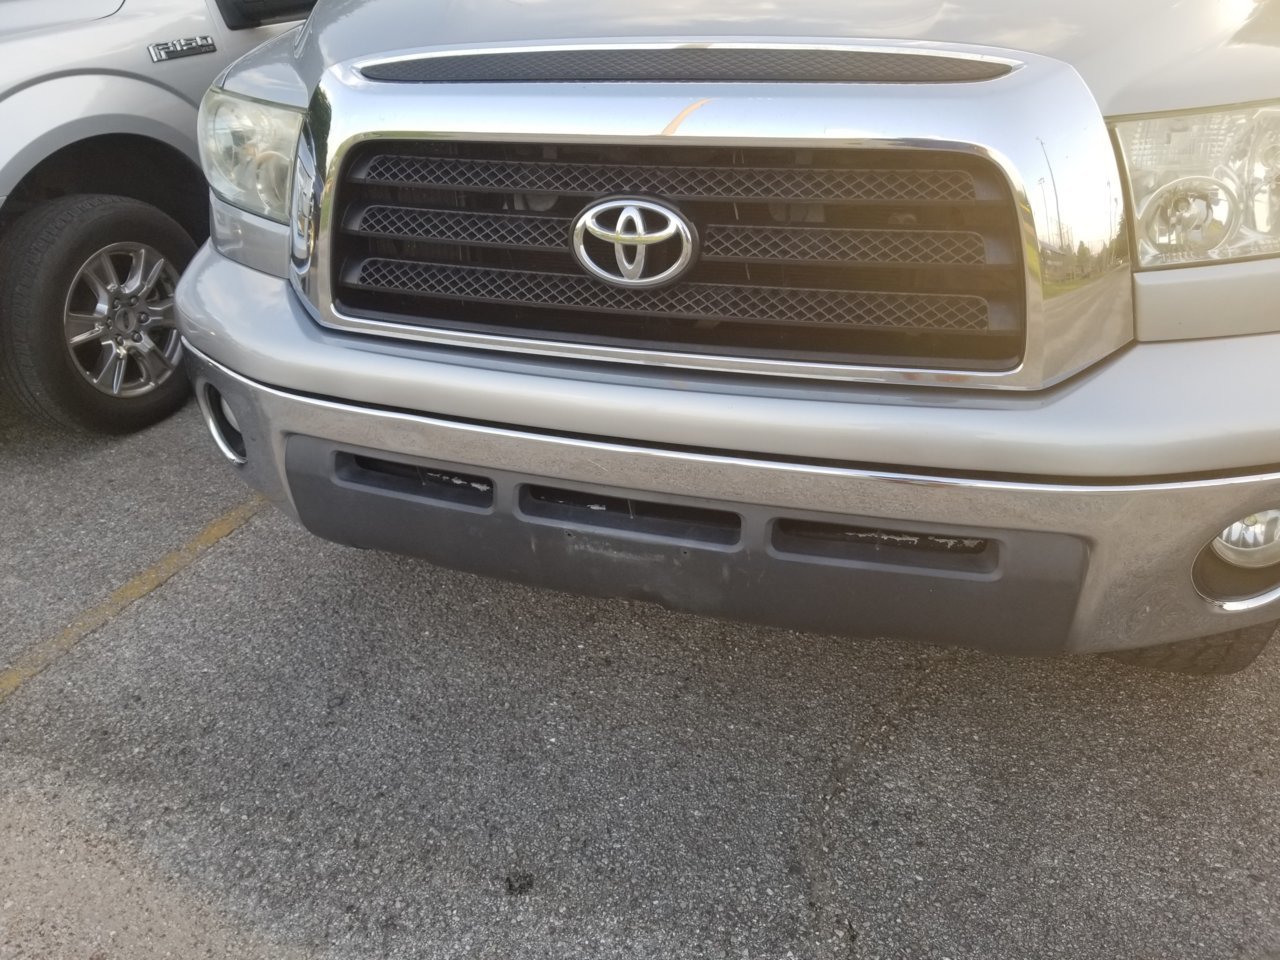 Lost My Front License Plate | Toyota Tundra Forum